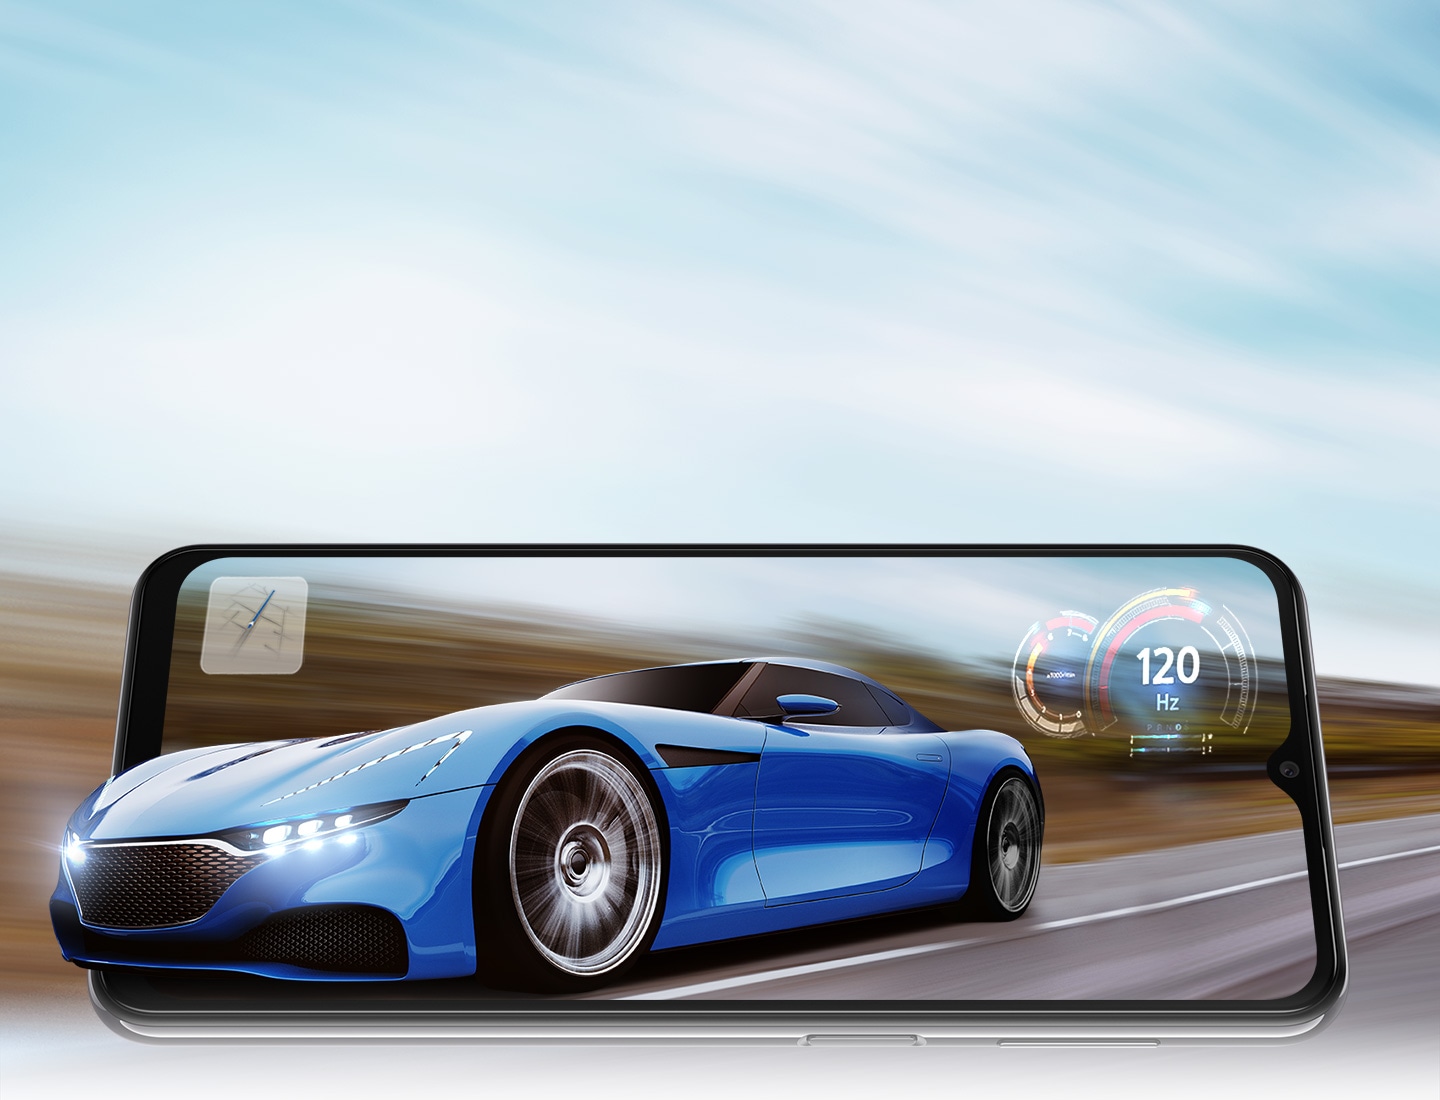 A Galaxy A23 5G is in landscape mode and on screen is a sports car driving on the road. The background is blurred to indicate that it’s driving fast. The front part of the car extends slightly beyond the frame of the phone as if the car is popping out of the display. There's also a map and a speedometer with 120 Hz in the middle, referring to the phone’s fast refresh rate.